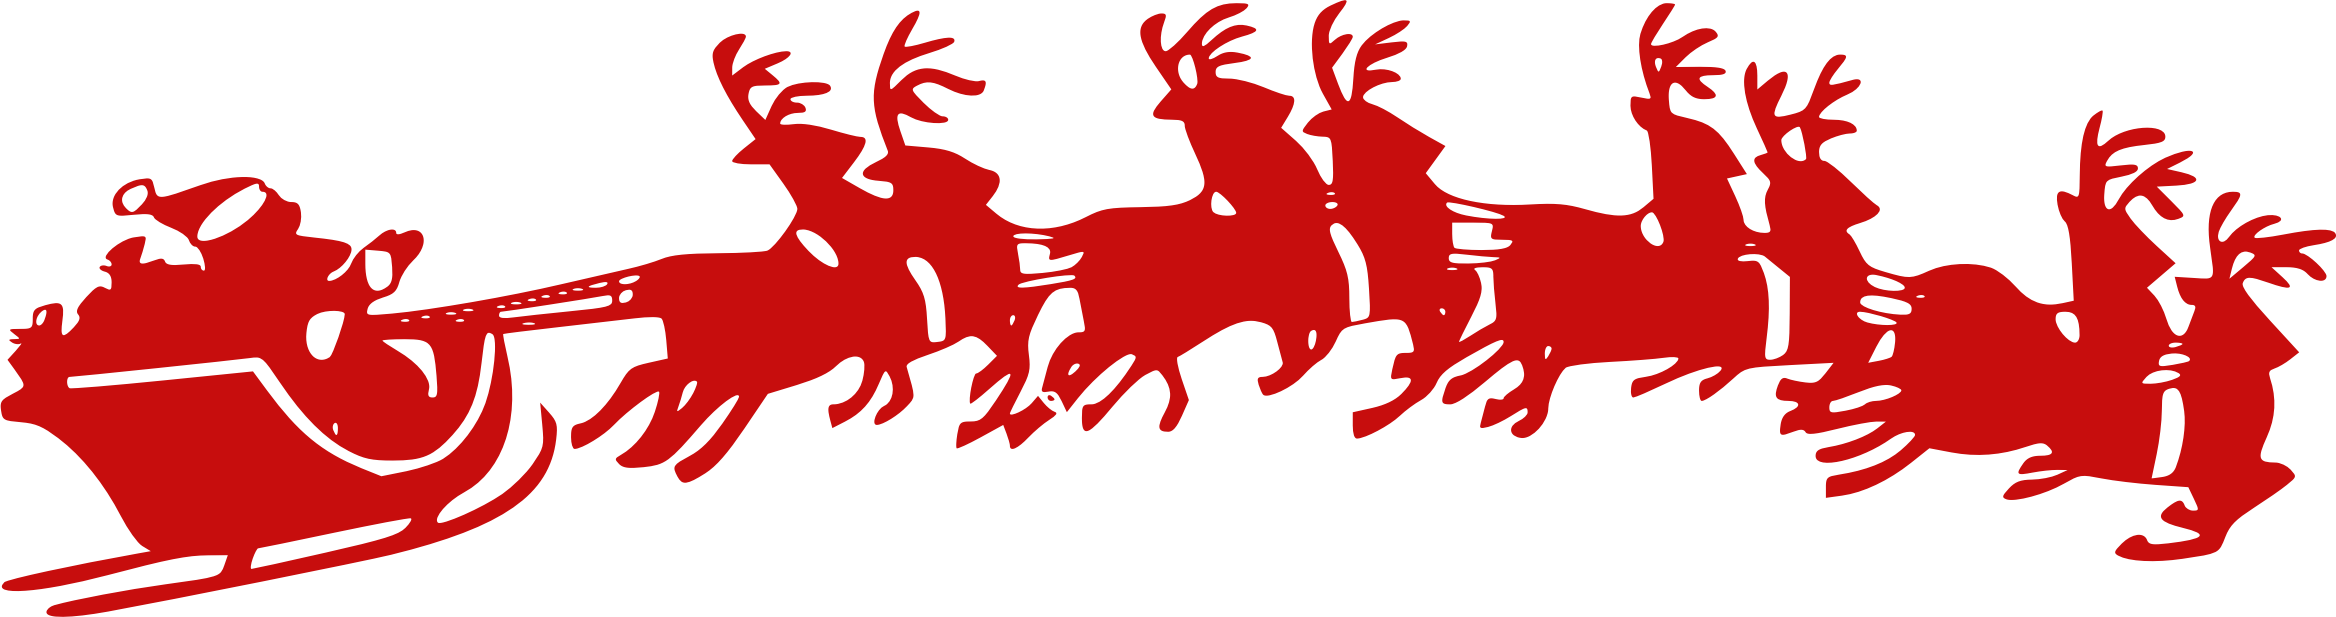 Santa Sleigh PNG Pictures, Santa Sleigh Clipart Free Download 